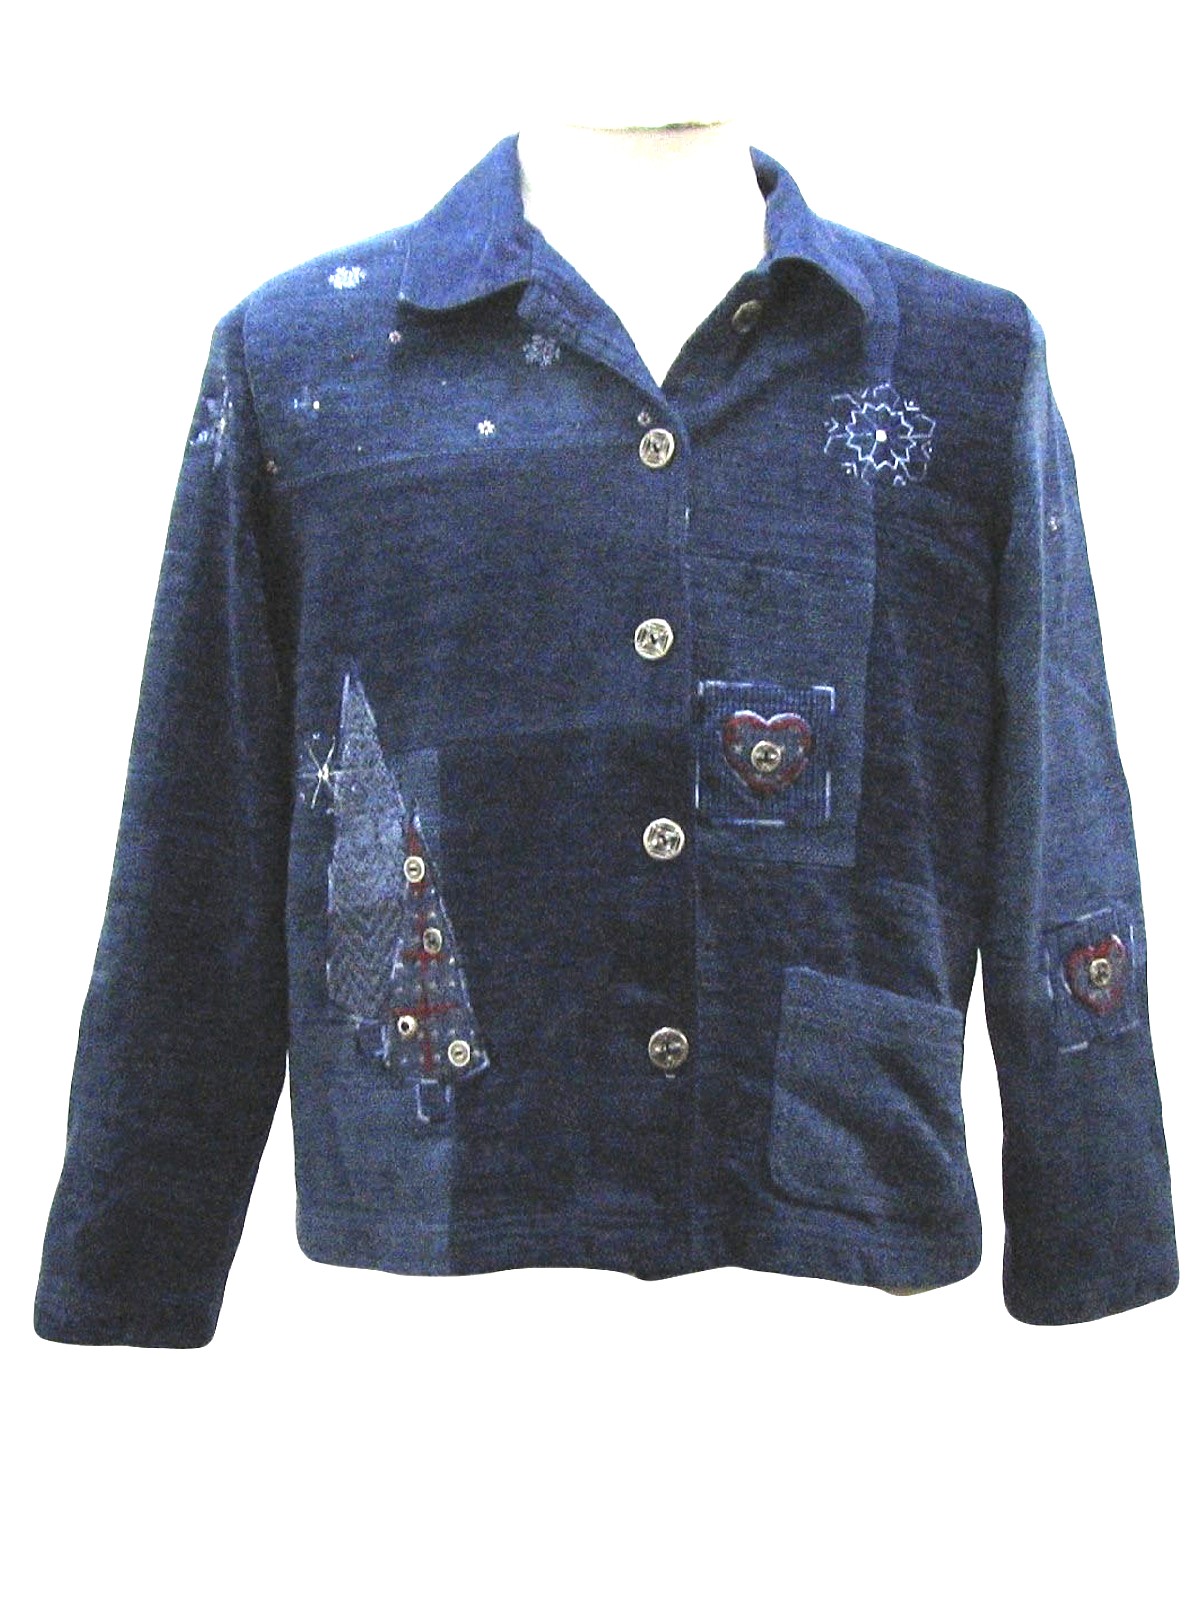 ... christmas jacket to wear over your ugly christmas sweater 36 00 sale $